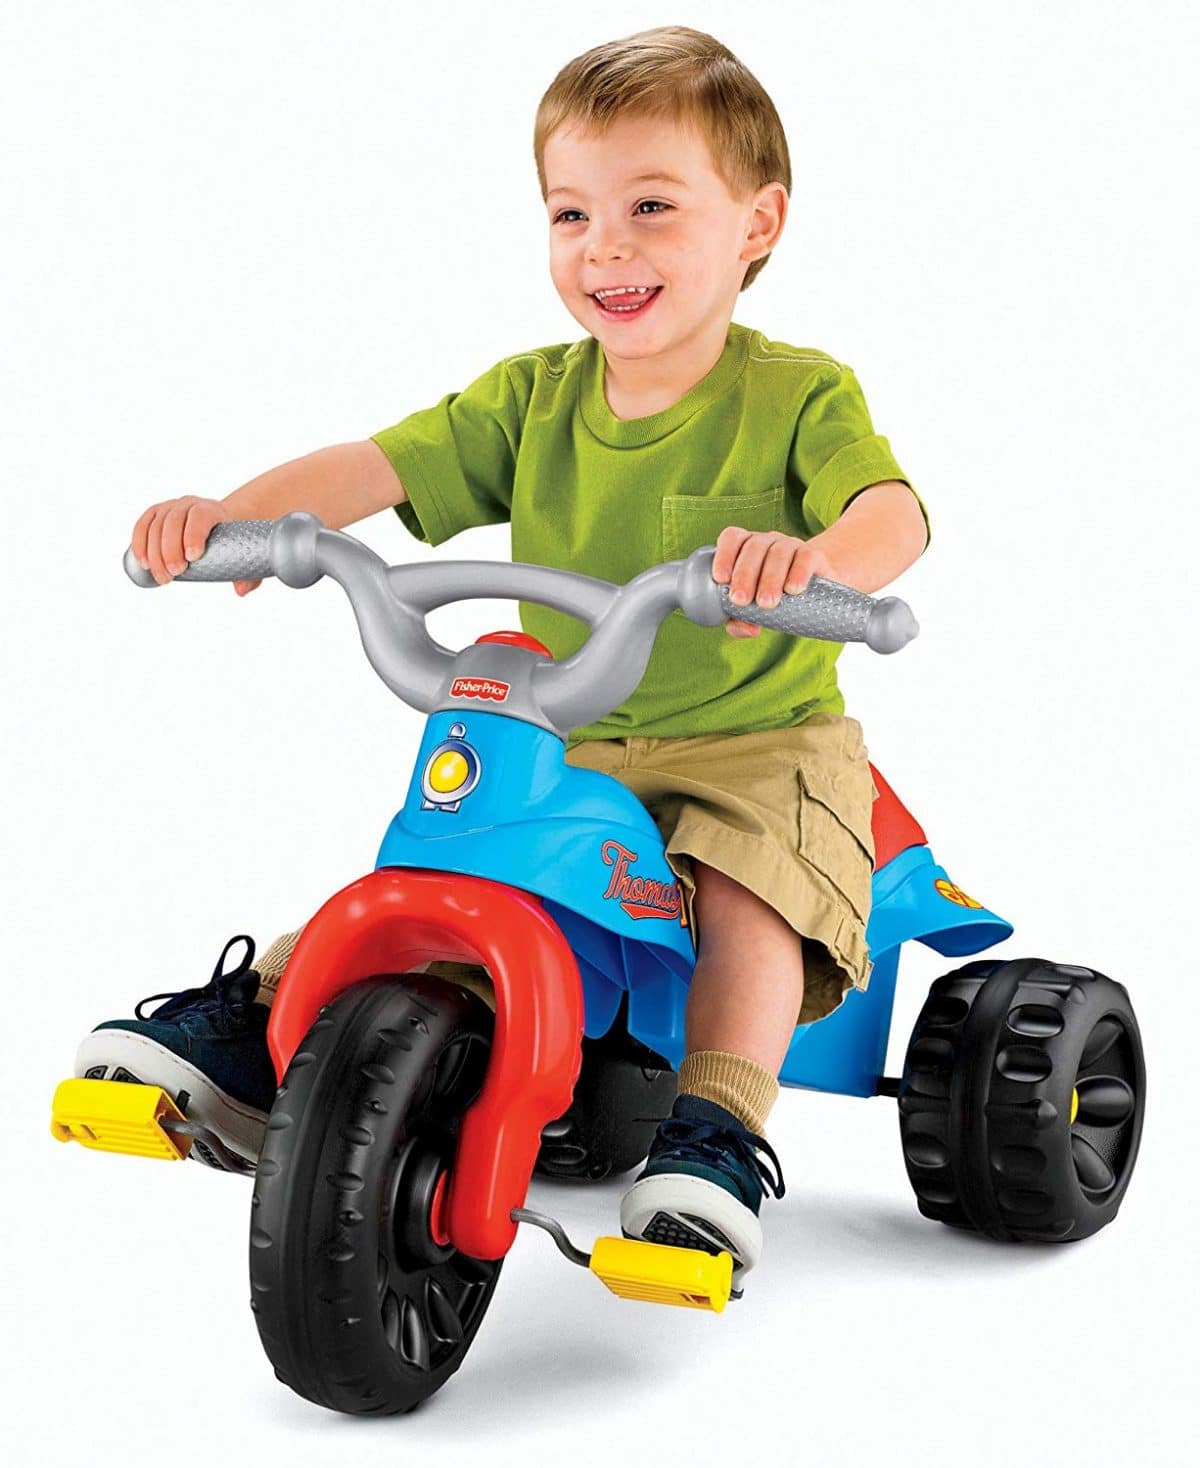 fisher price harley davidson tricycle